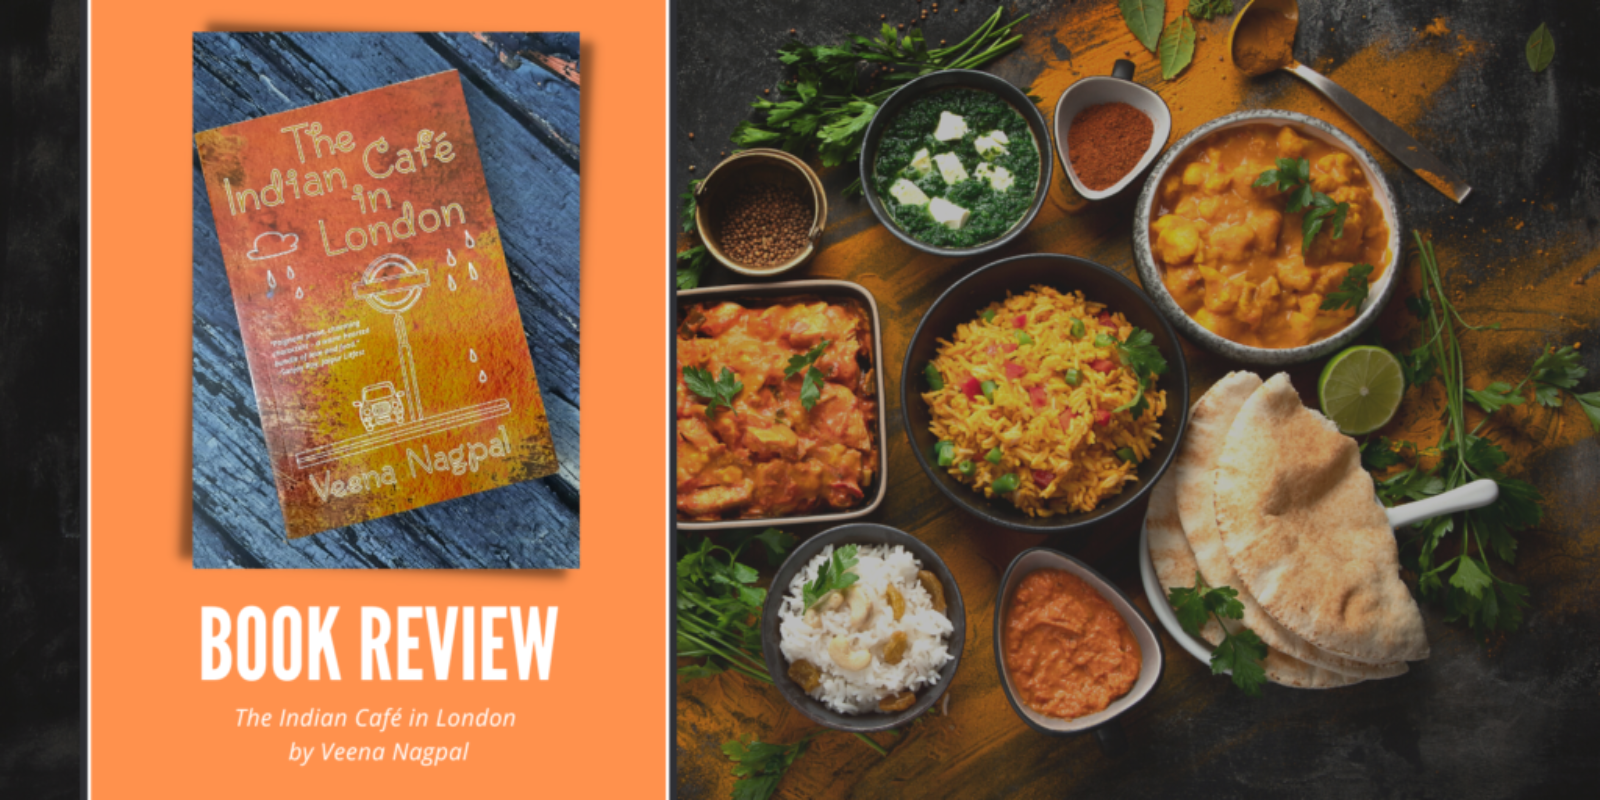 The Indian Cafe in London by Veena Nagpal Book Review (2)